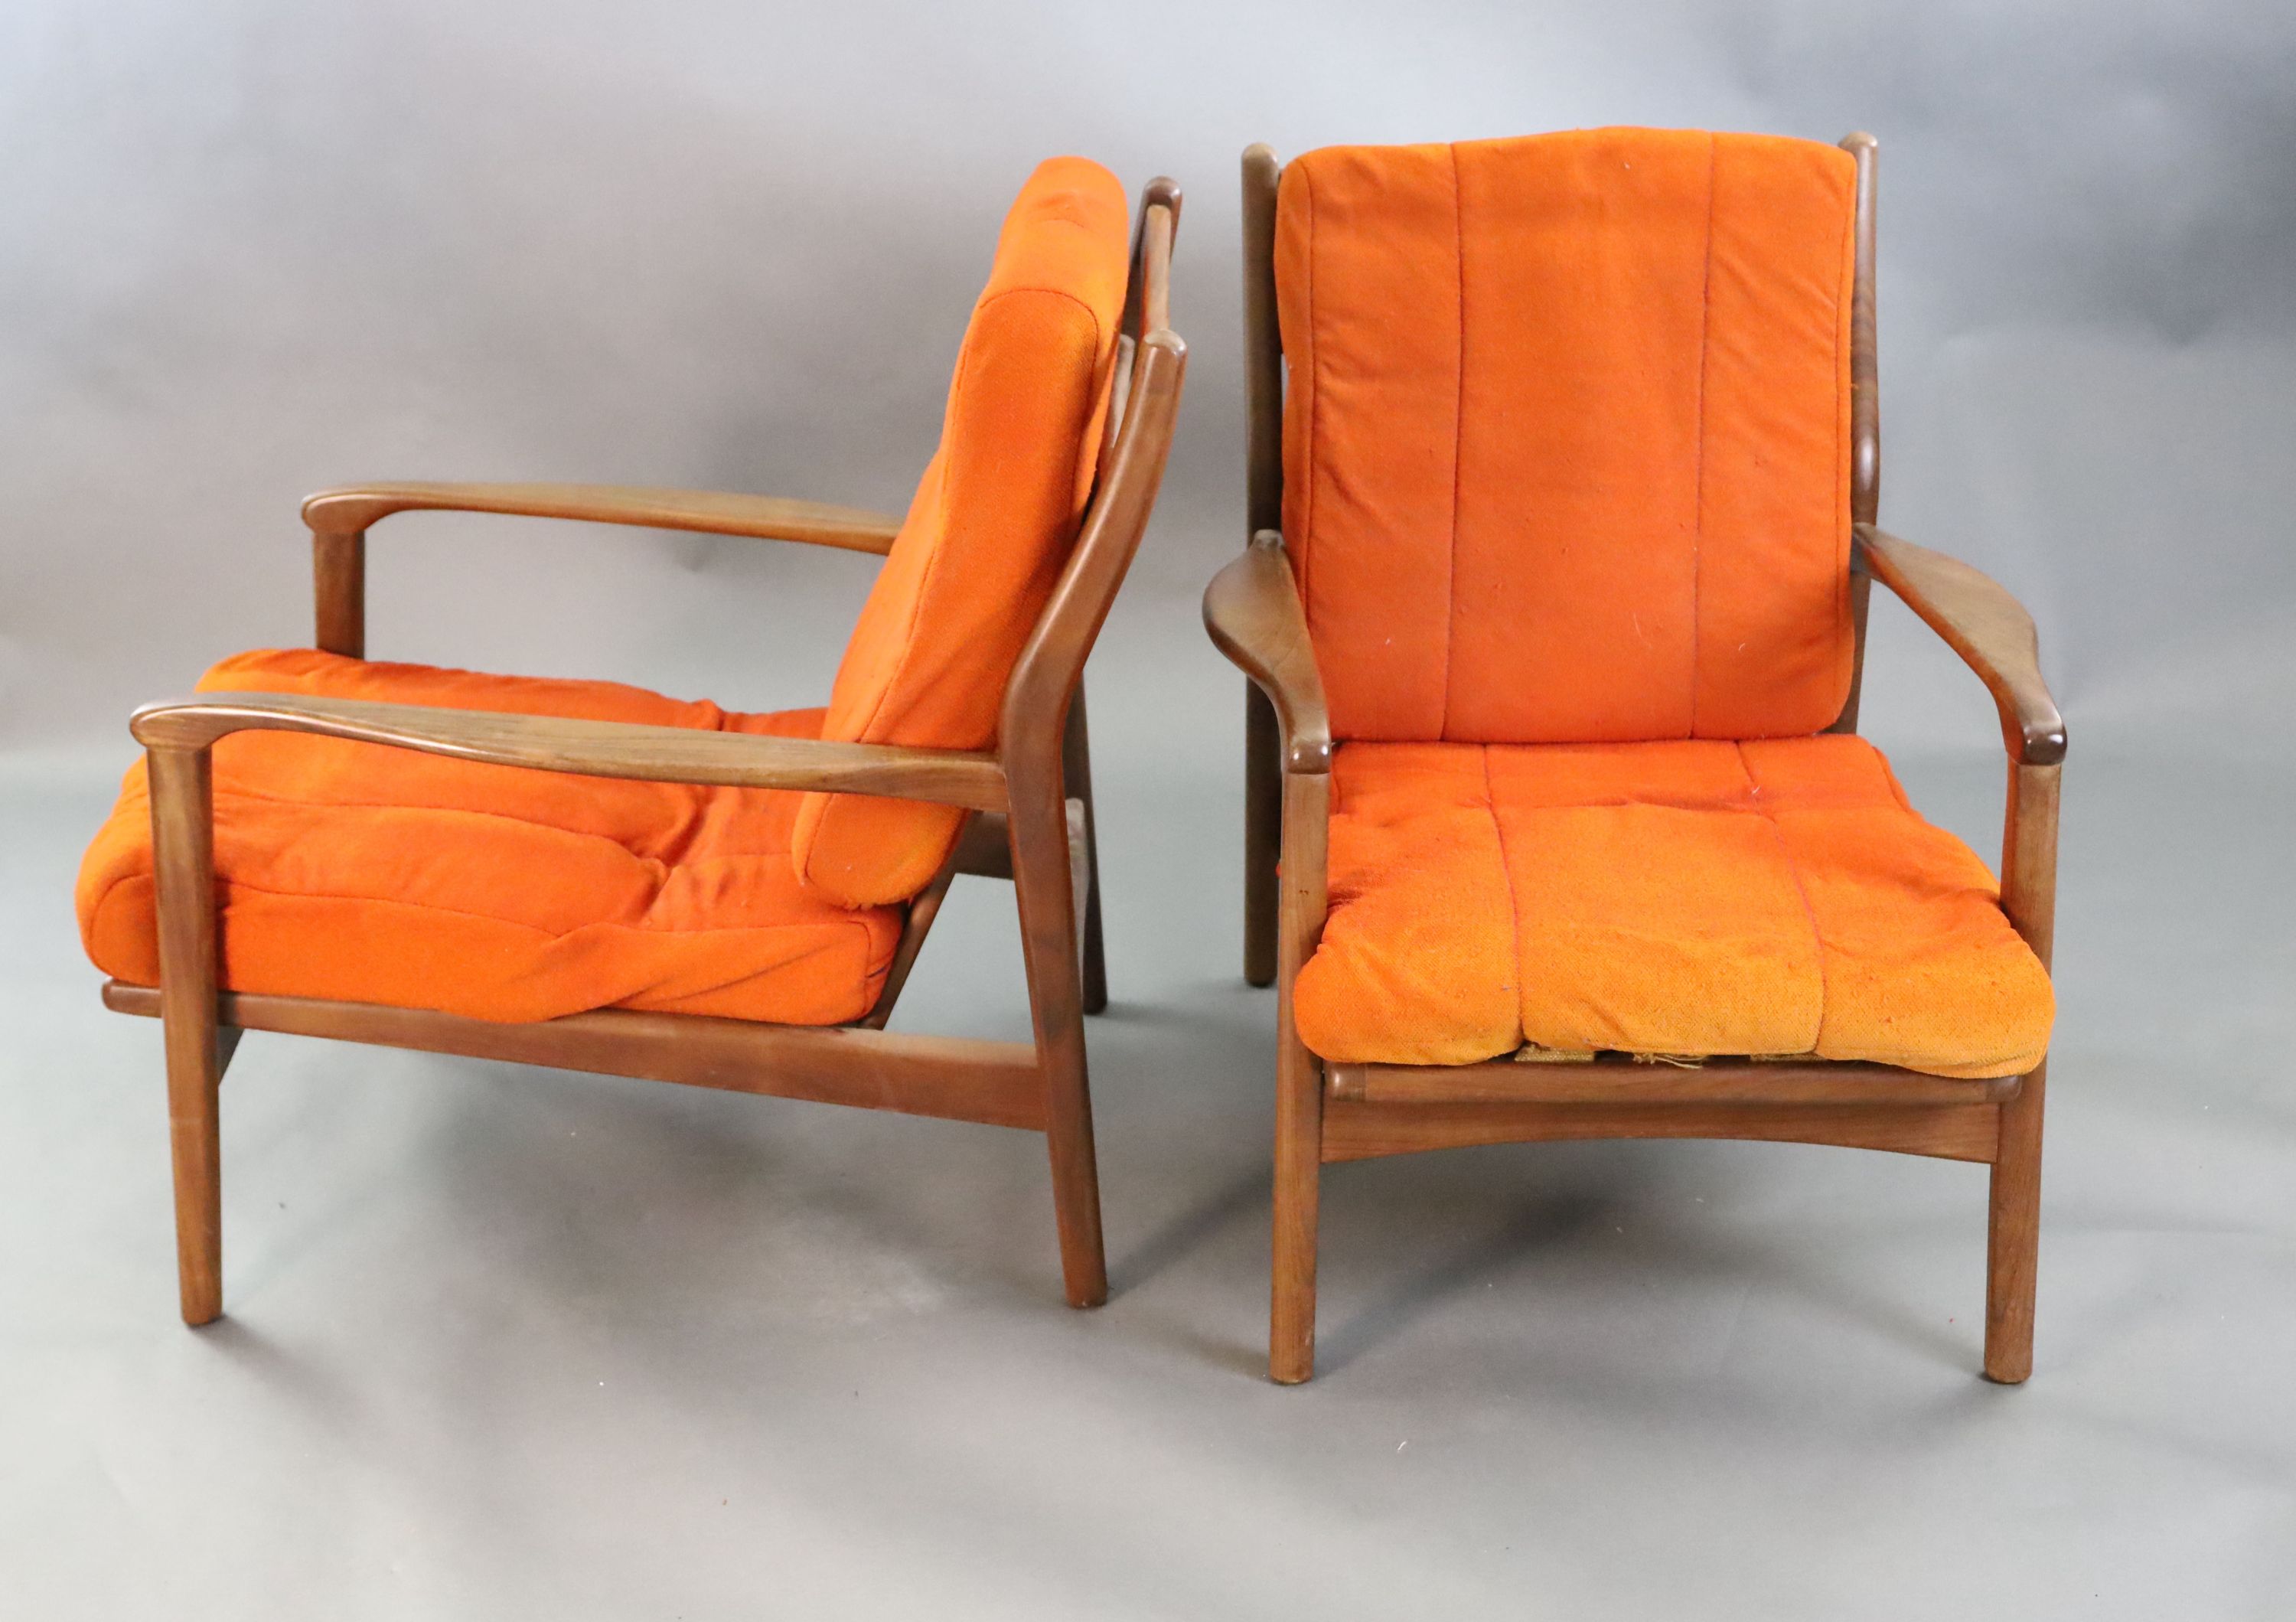 A pair of mid century Danish teak armchairs, W.2ft 2.5in. D.2ft 10in. H.2ft 8in.